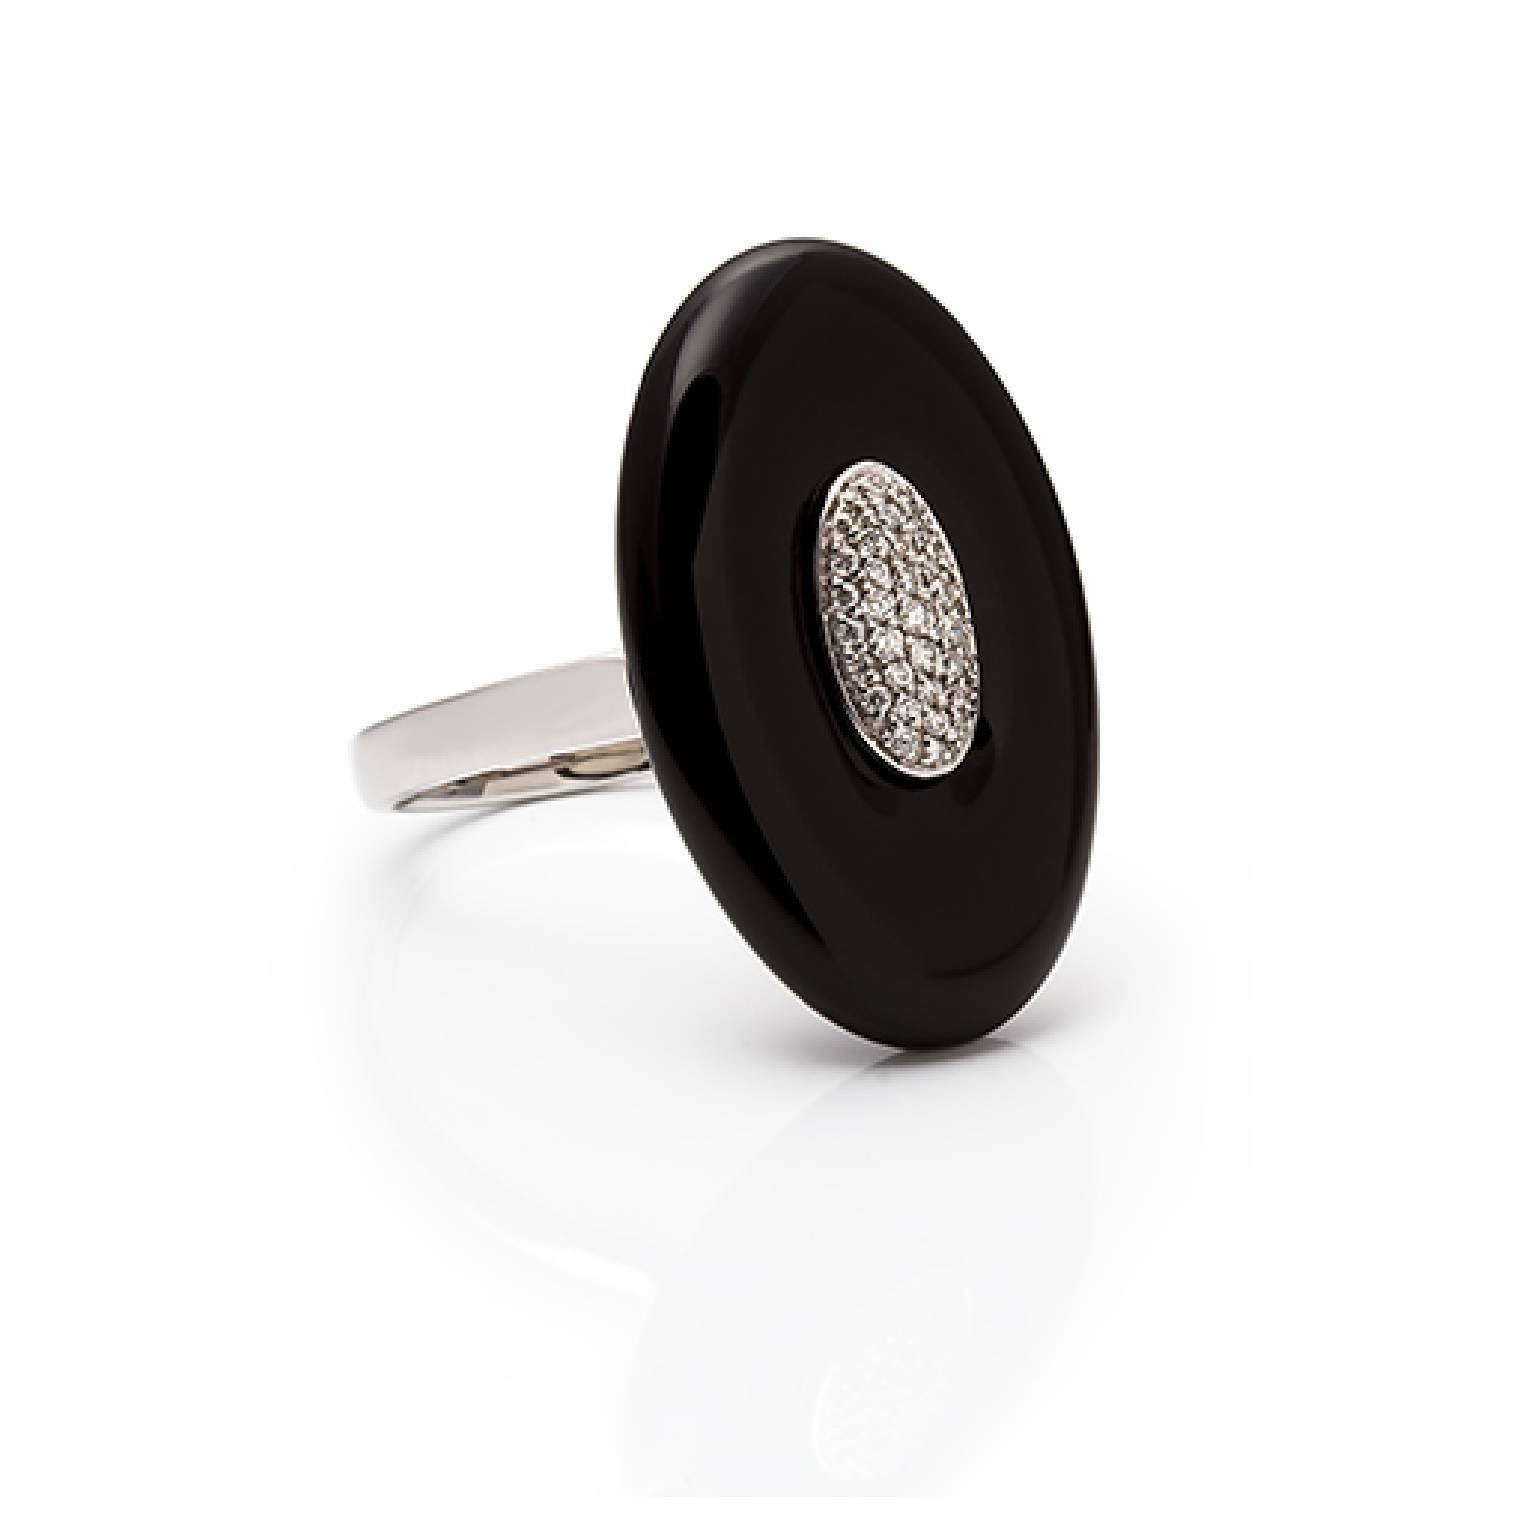 Black and Diamonds..

Contemporary style combined with elegance...

This 18 carat white gold cocktail ring features a stunning Onyx border with 0.18 carat brilliant cut white diamonds which are nestled in the center.

The ring is beautifully